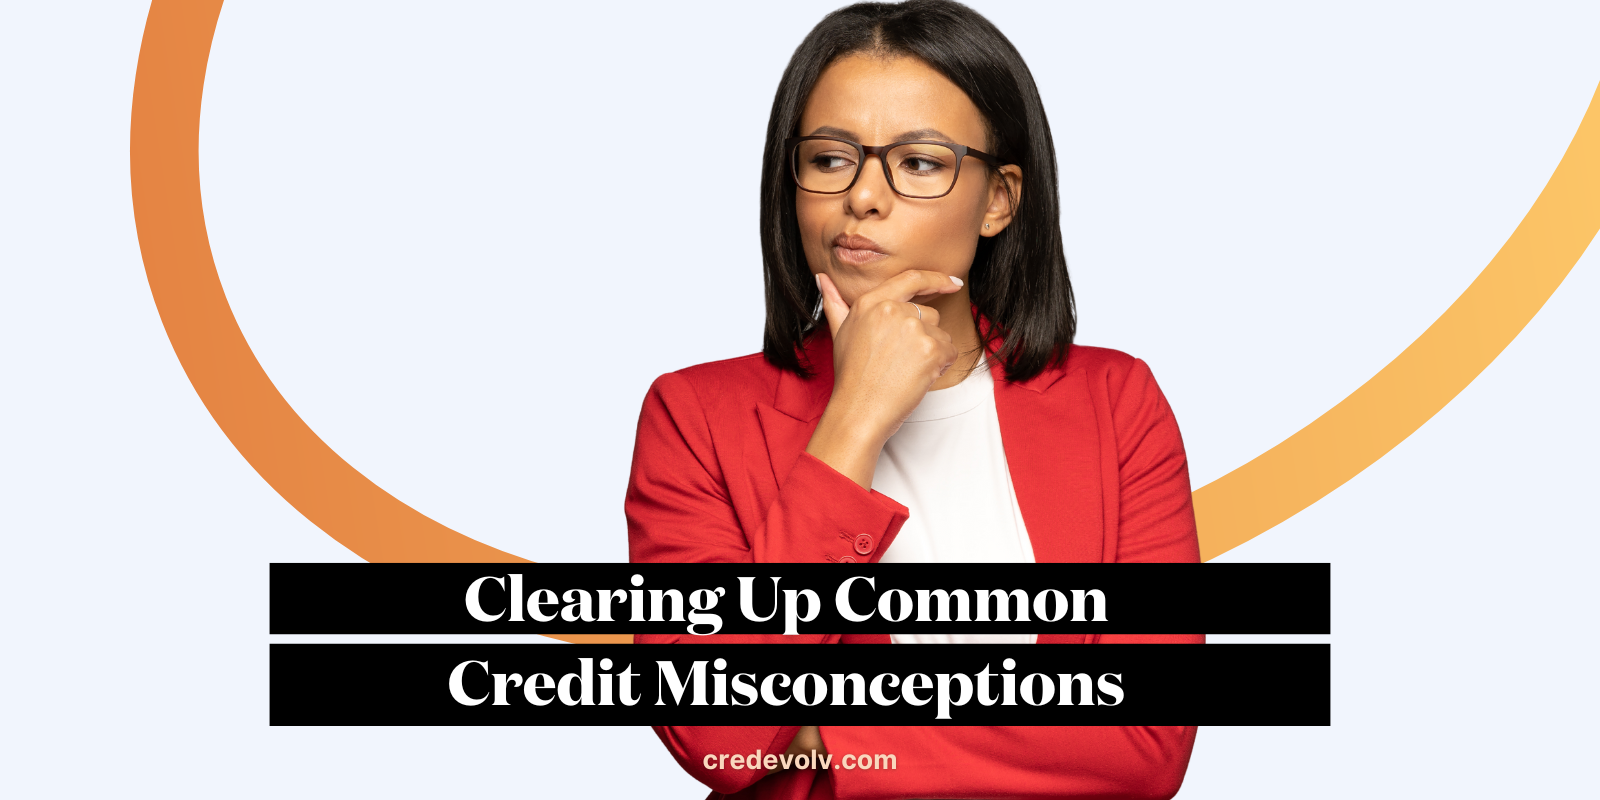 CredEvolv Blog - Featured Image - Clearing Up Common Credit Misconceptions